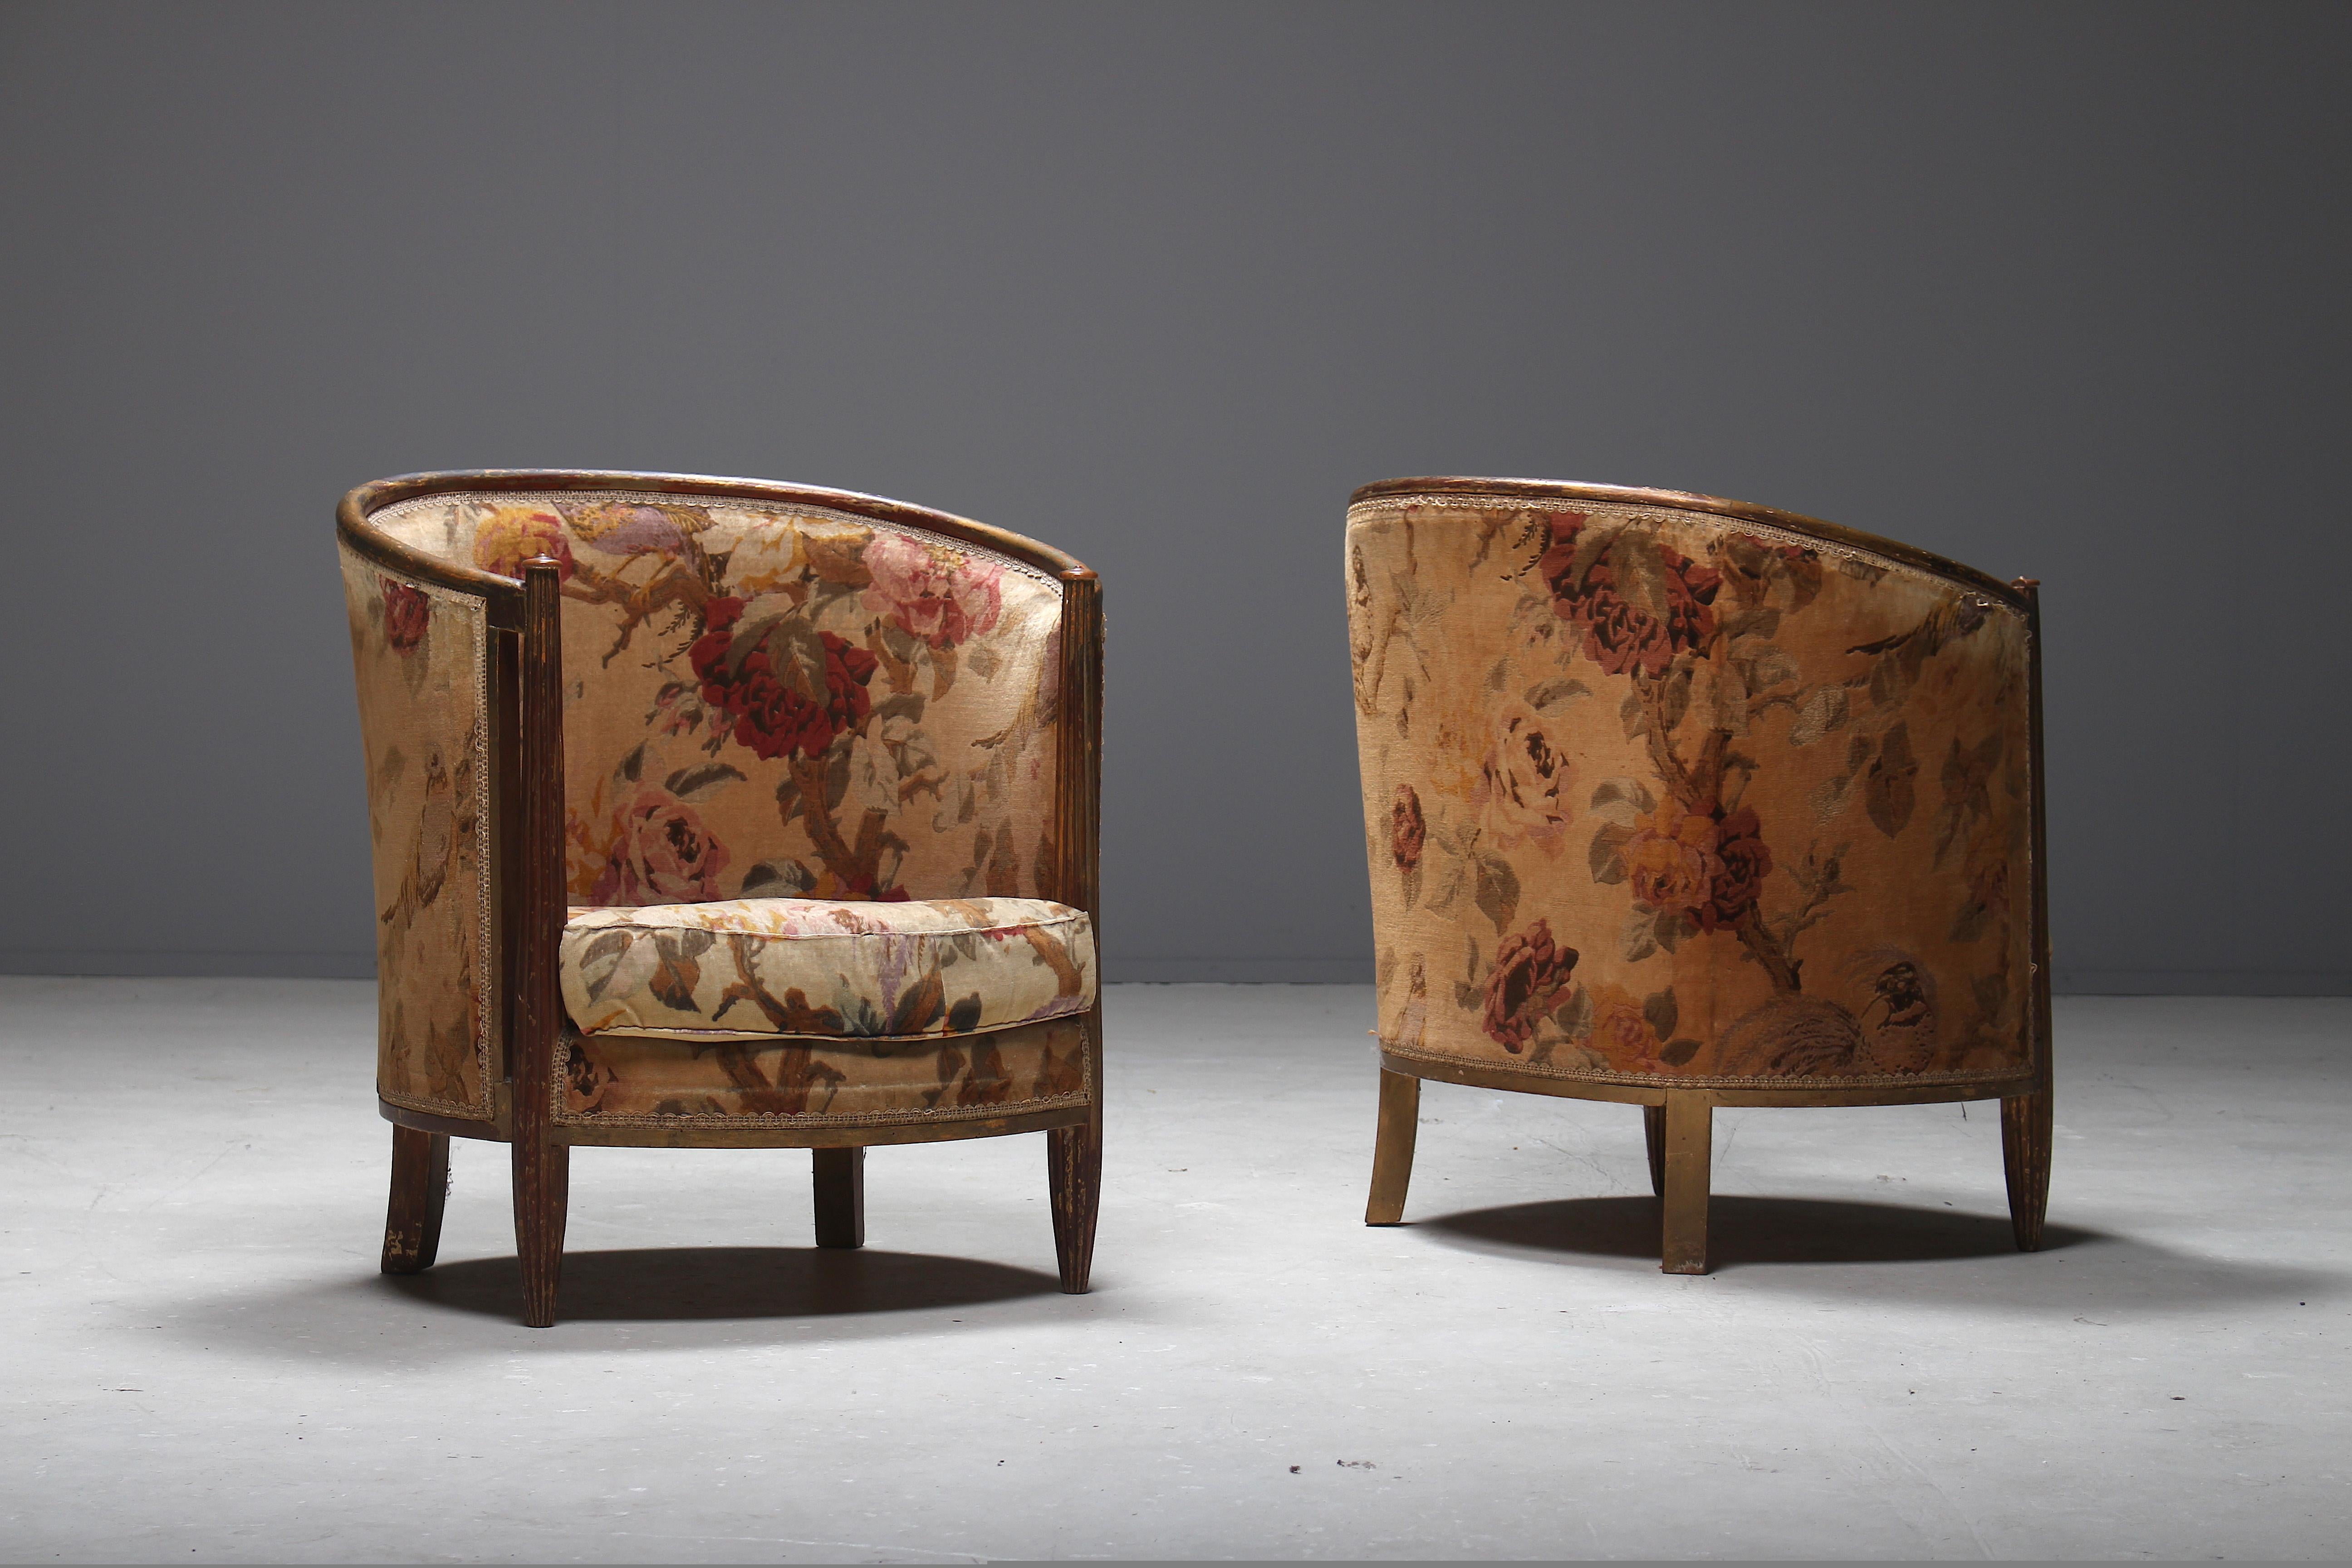 This pair of club chairs is designed by the well-known French Art Deco designer Paul Follot. Follot was not just a designer but a real artist and trained as sculptor.
From 1904 Follot headed his own decorating company, catering to a wealthy